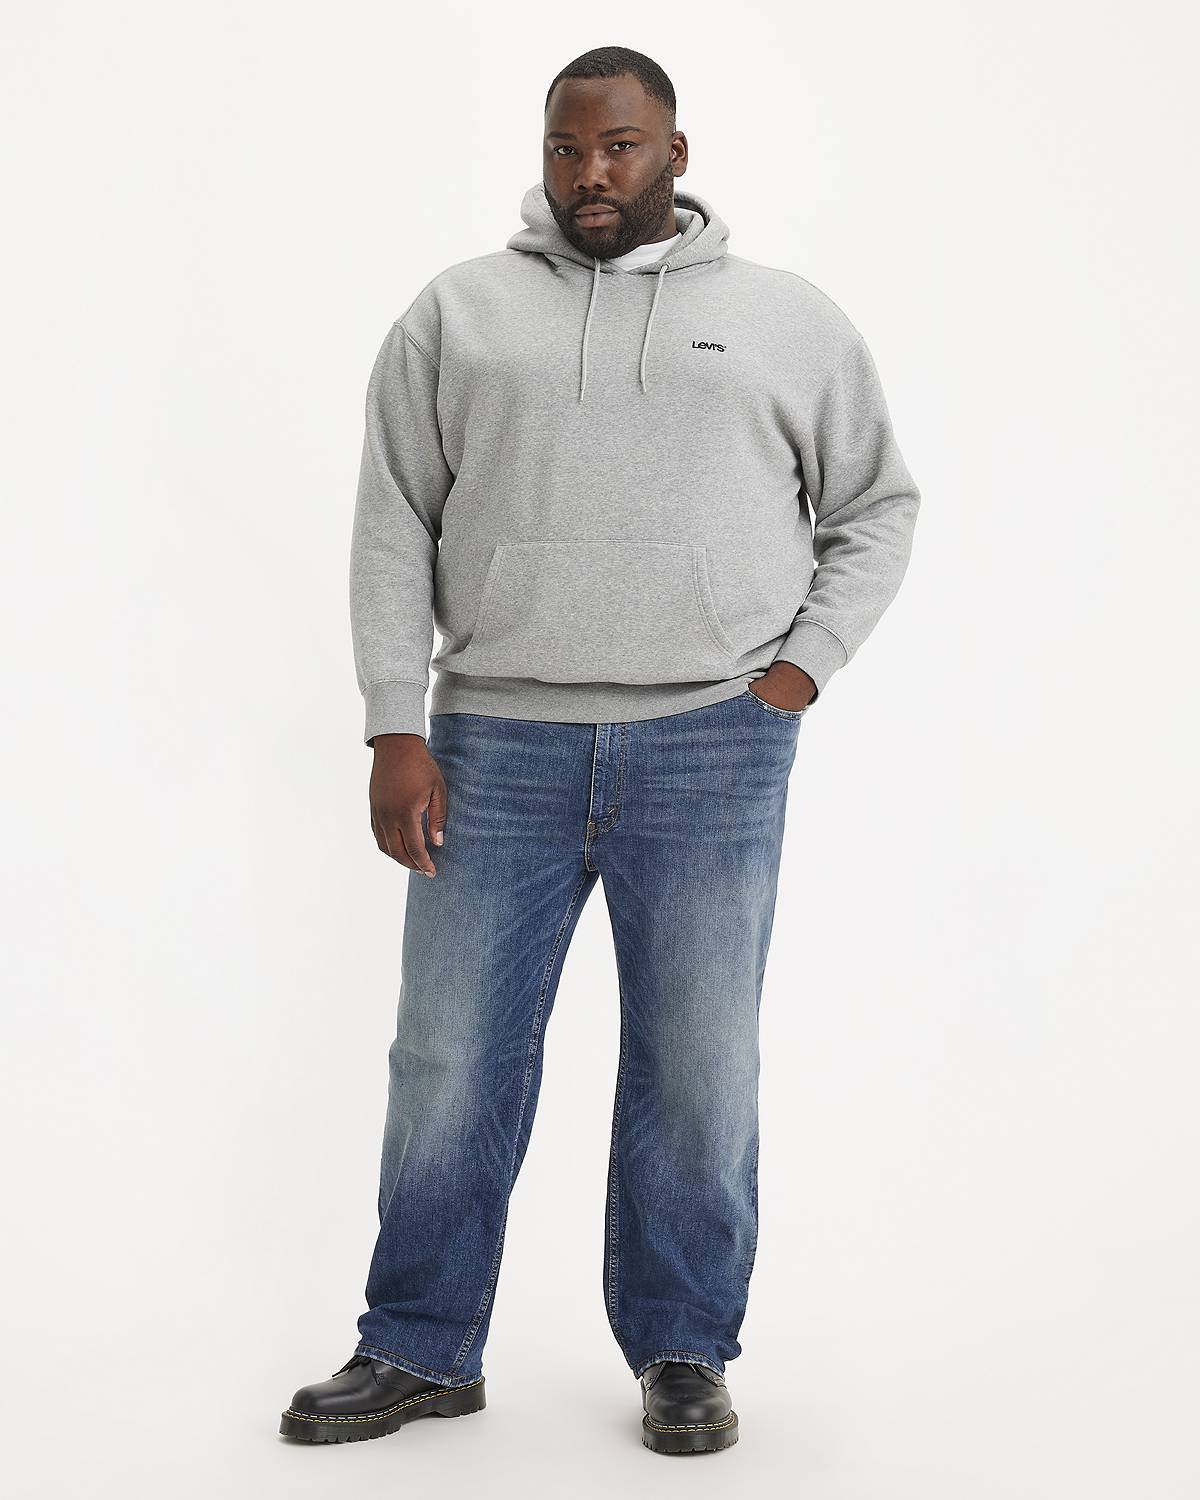 Model wearing jeans and a gray sweatshirt